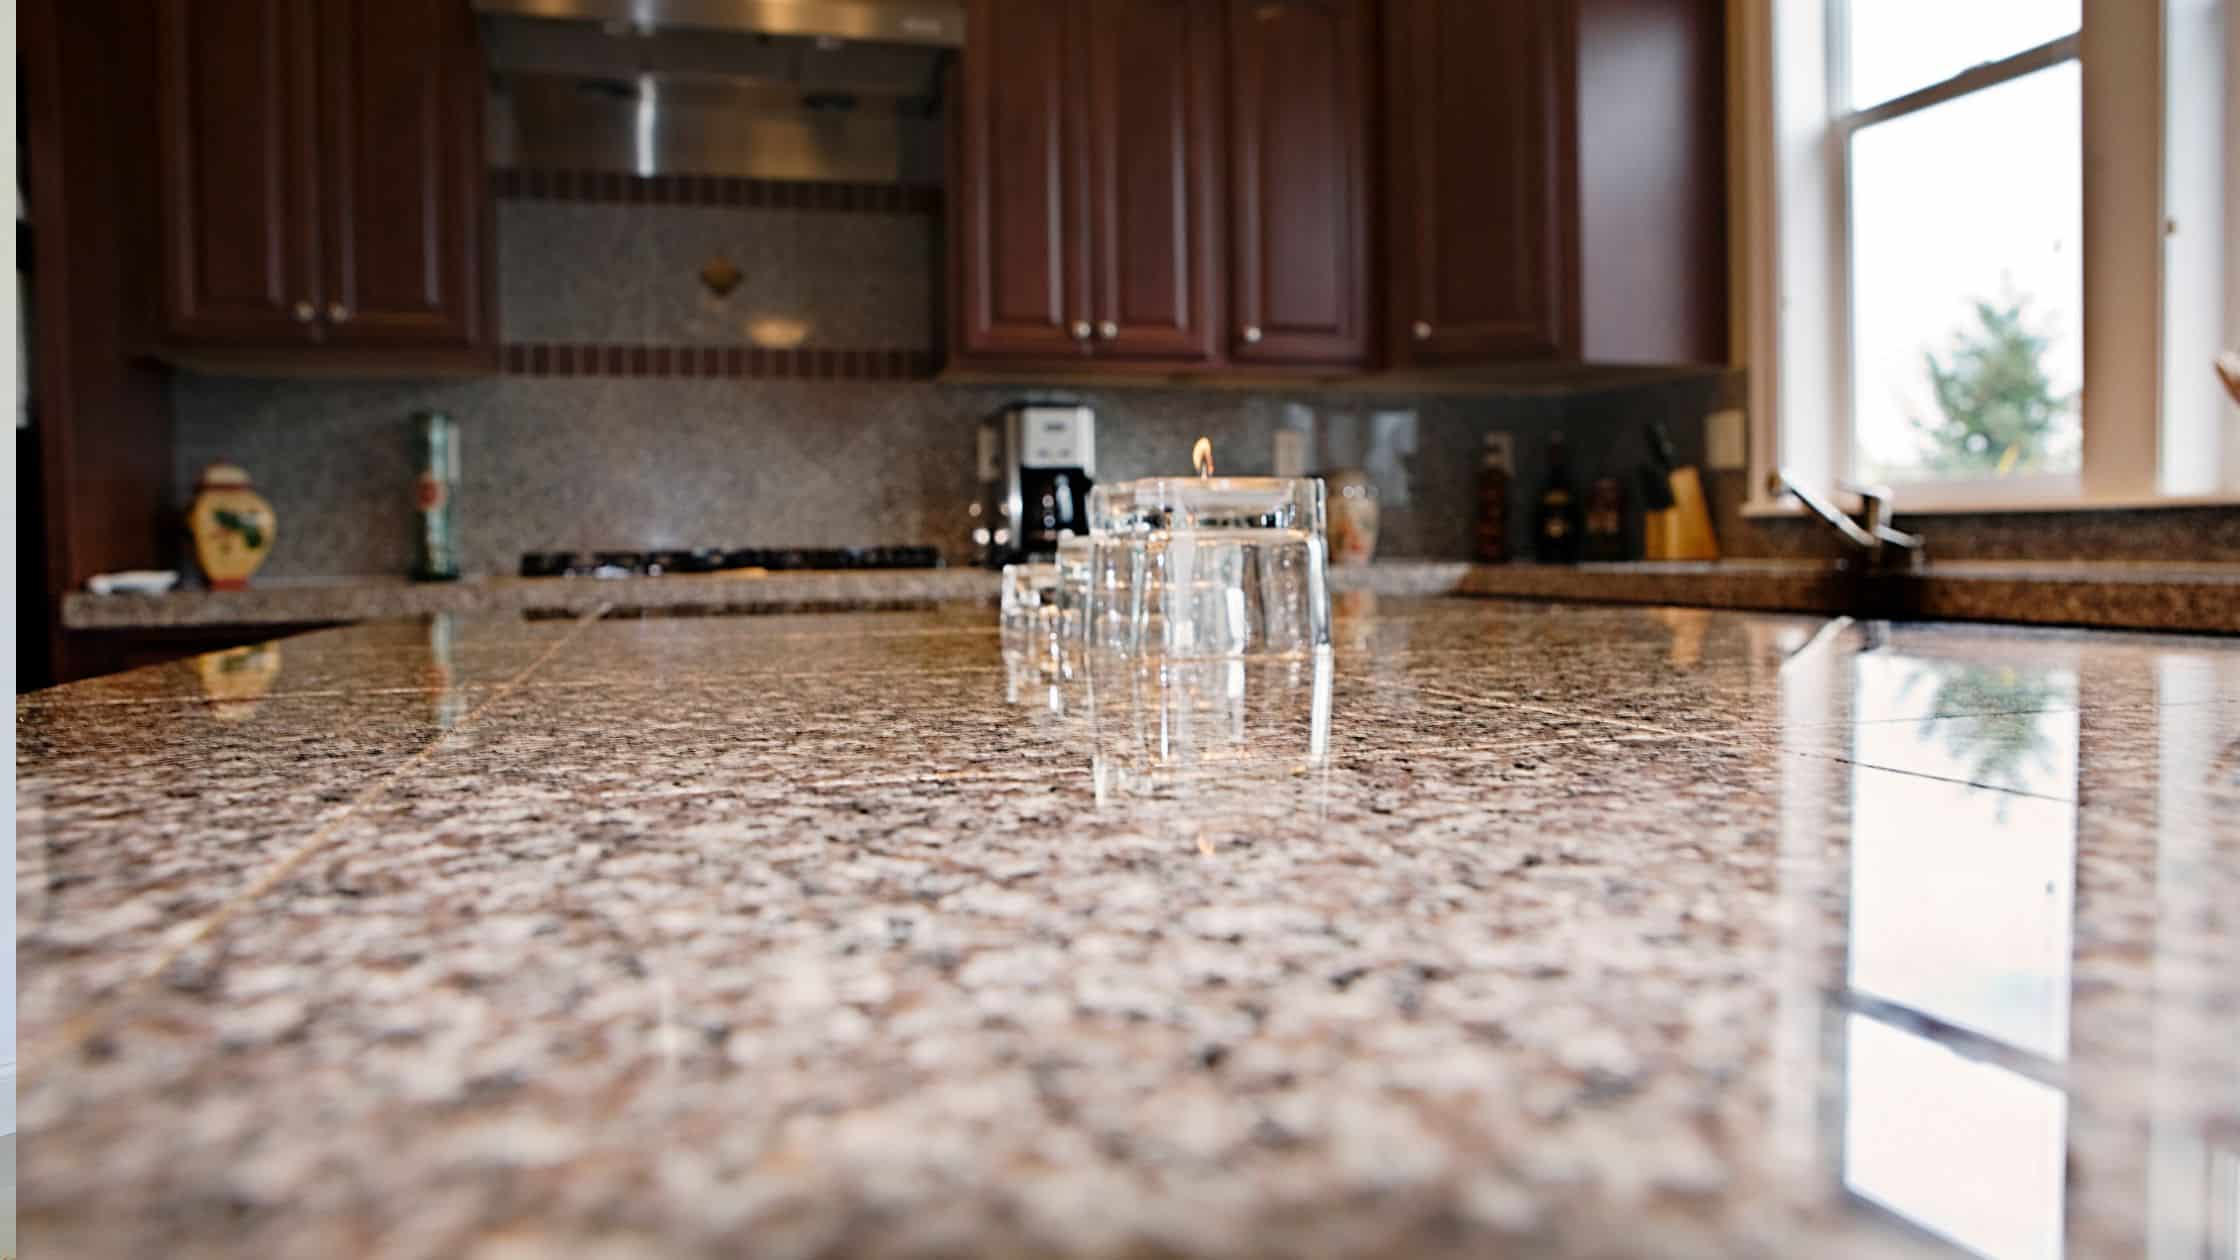 countertop installers near me in New Jersey